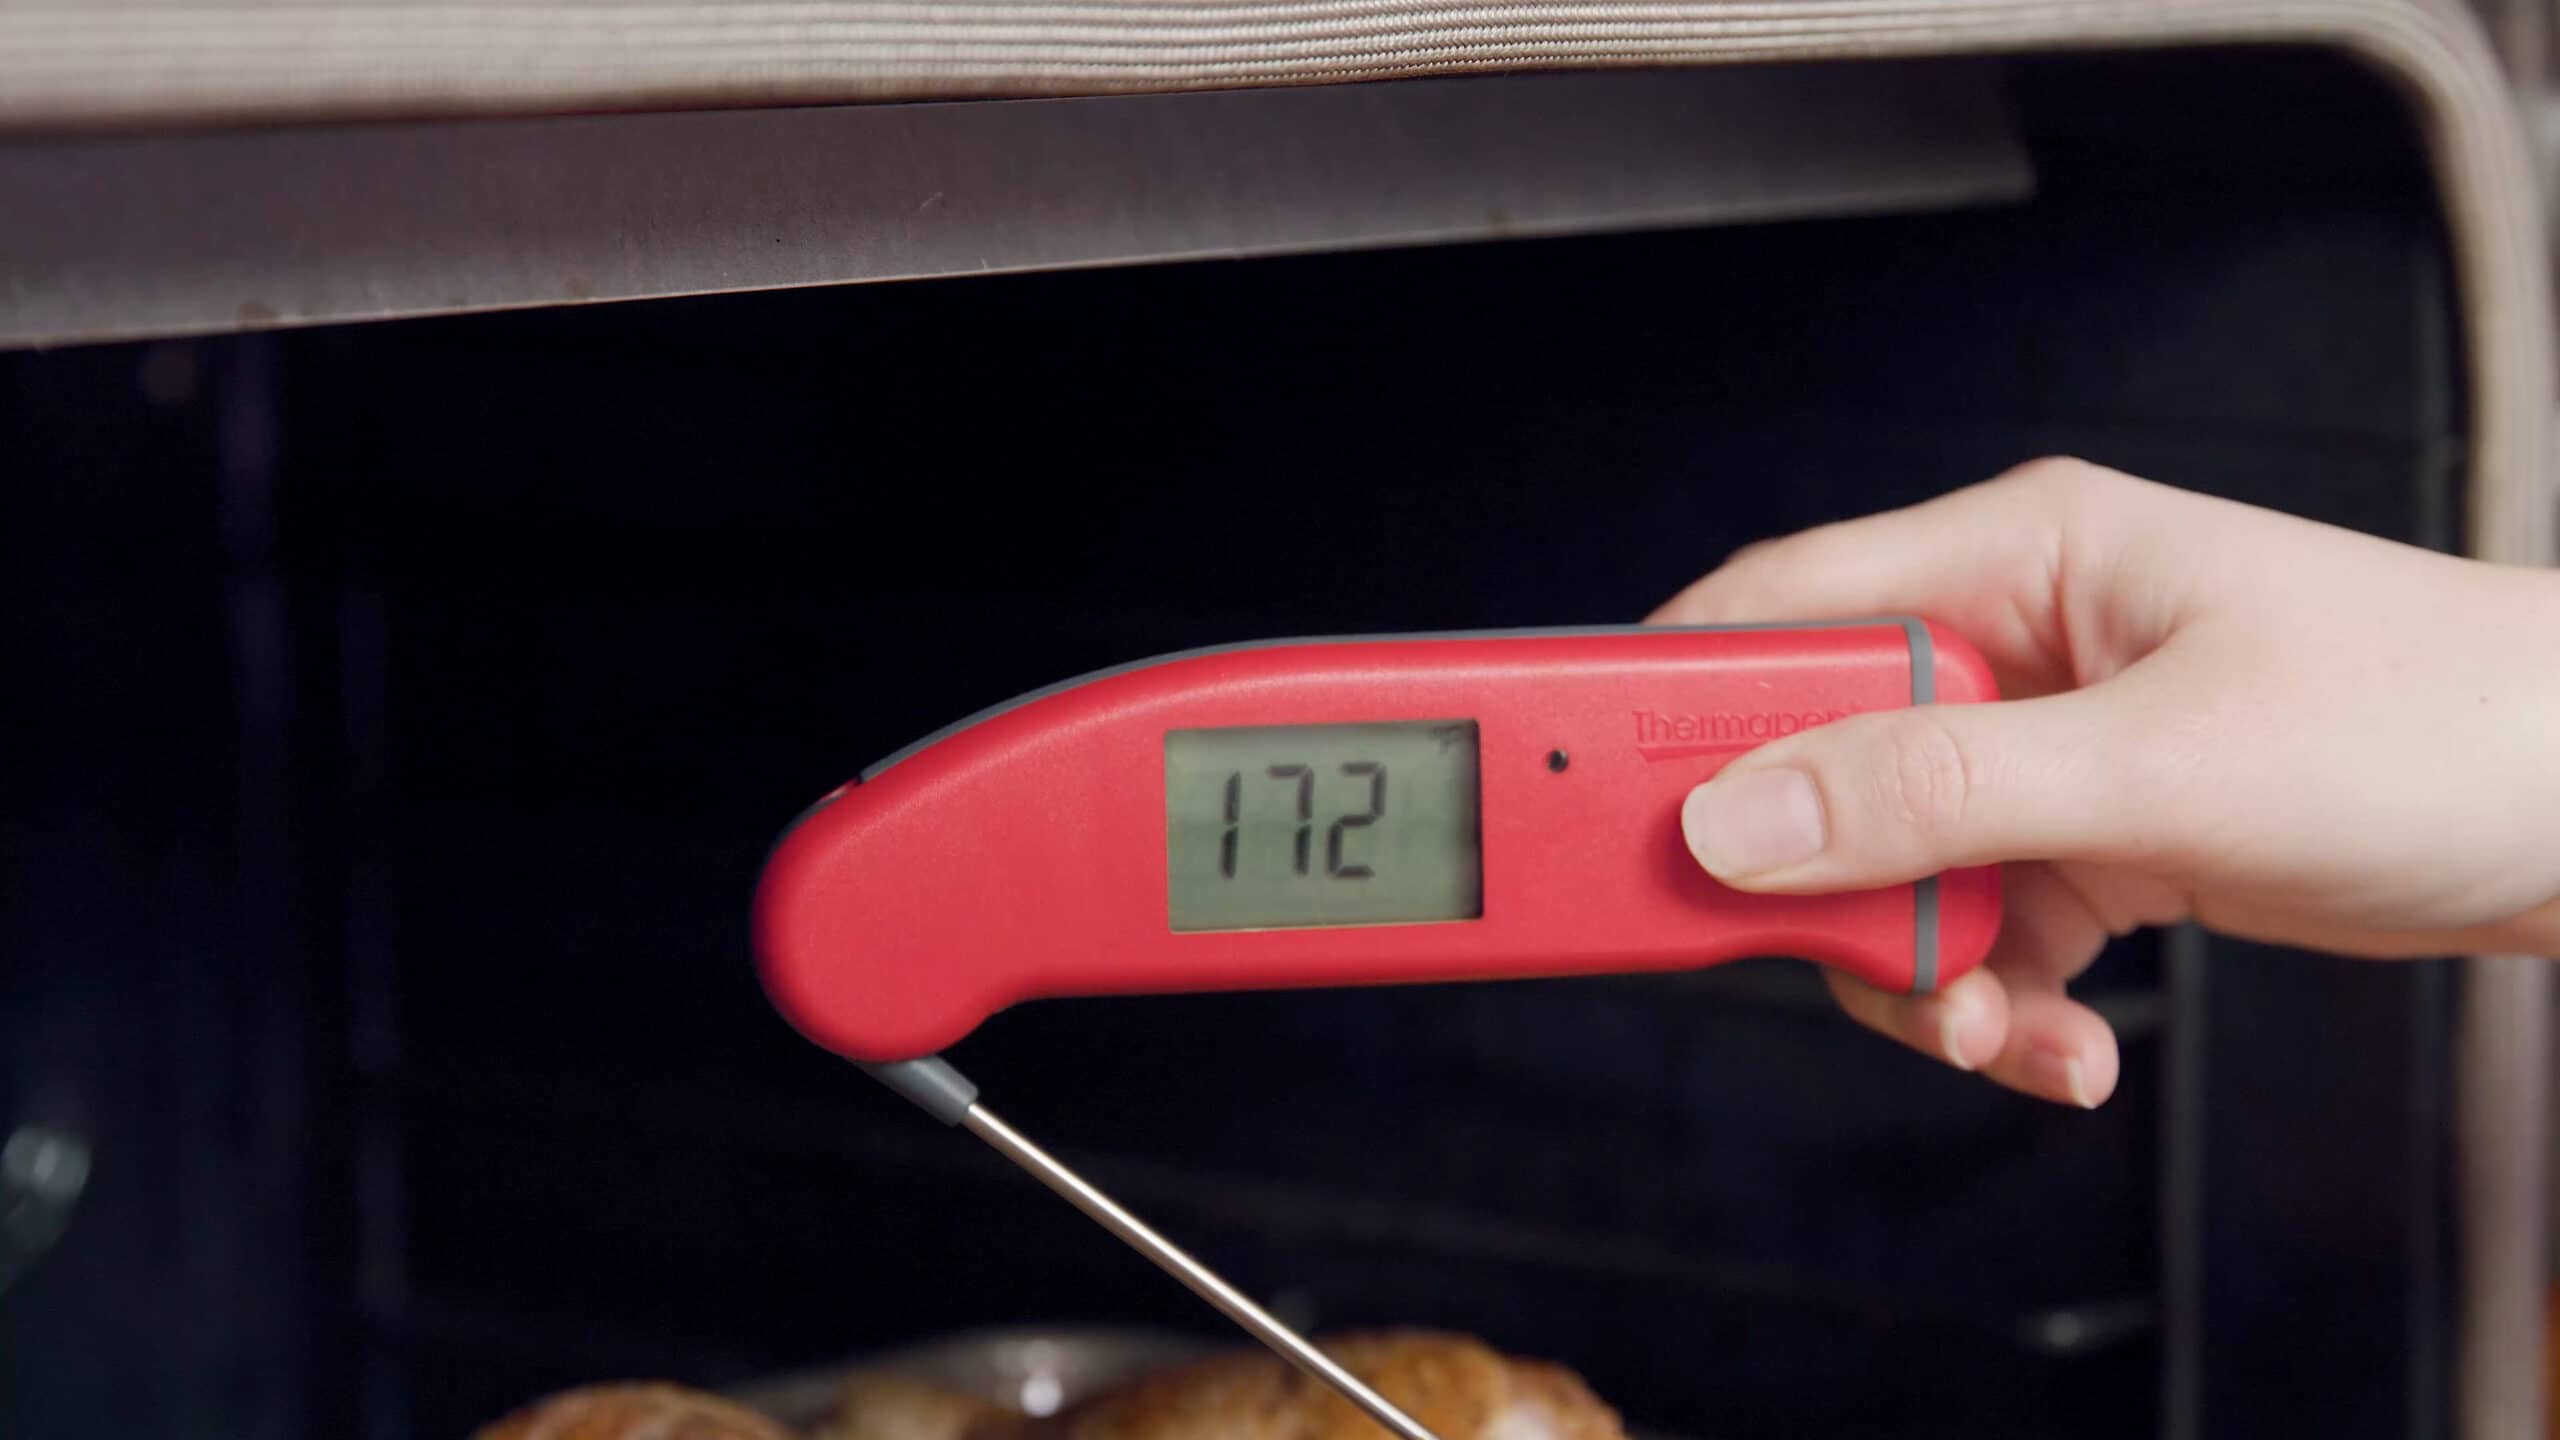 Angled view of an open oven with a digital thermometer in center view displaying 172 degrees Fahrenheit which is the ideal temperature for cooked chicken.